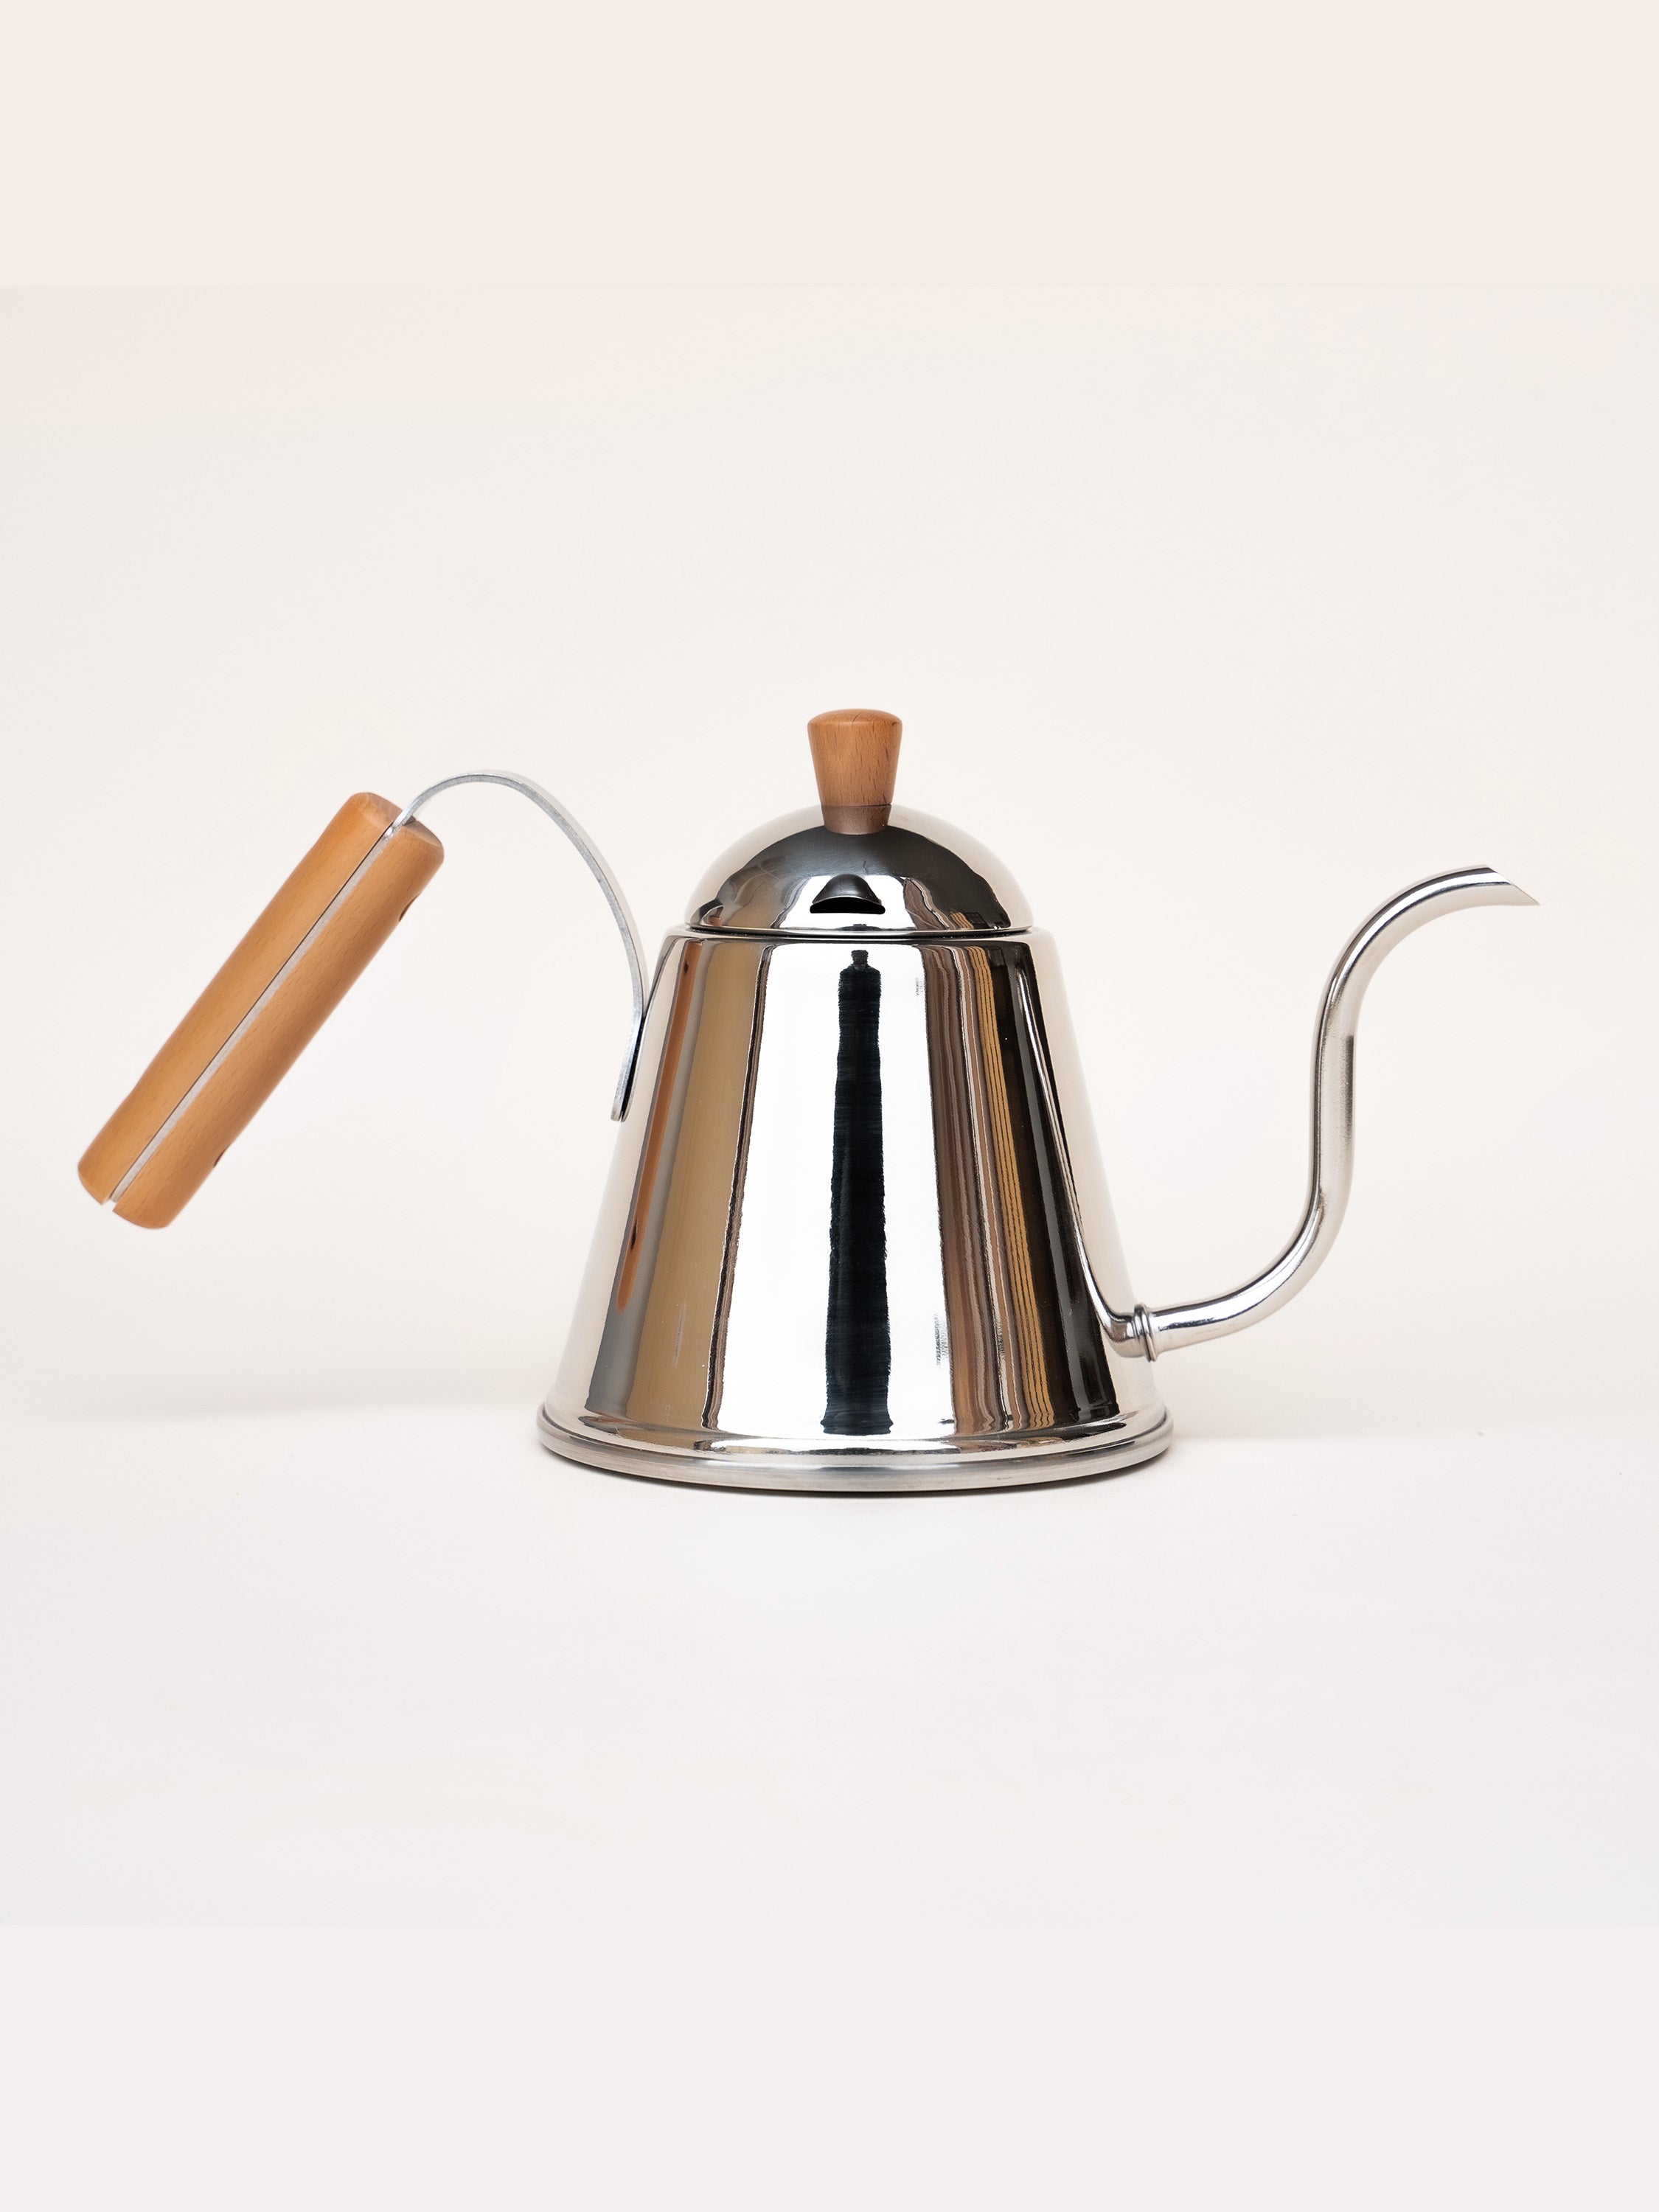 Japanese Stainless Steel Kettle | lifestyle